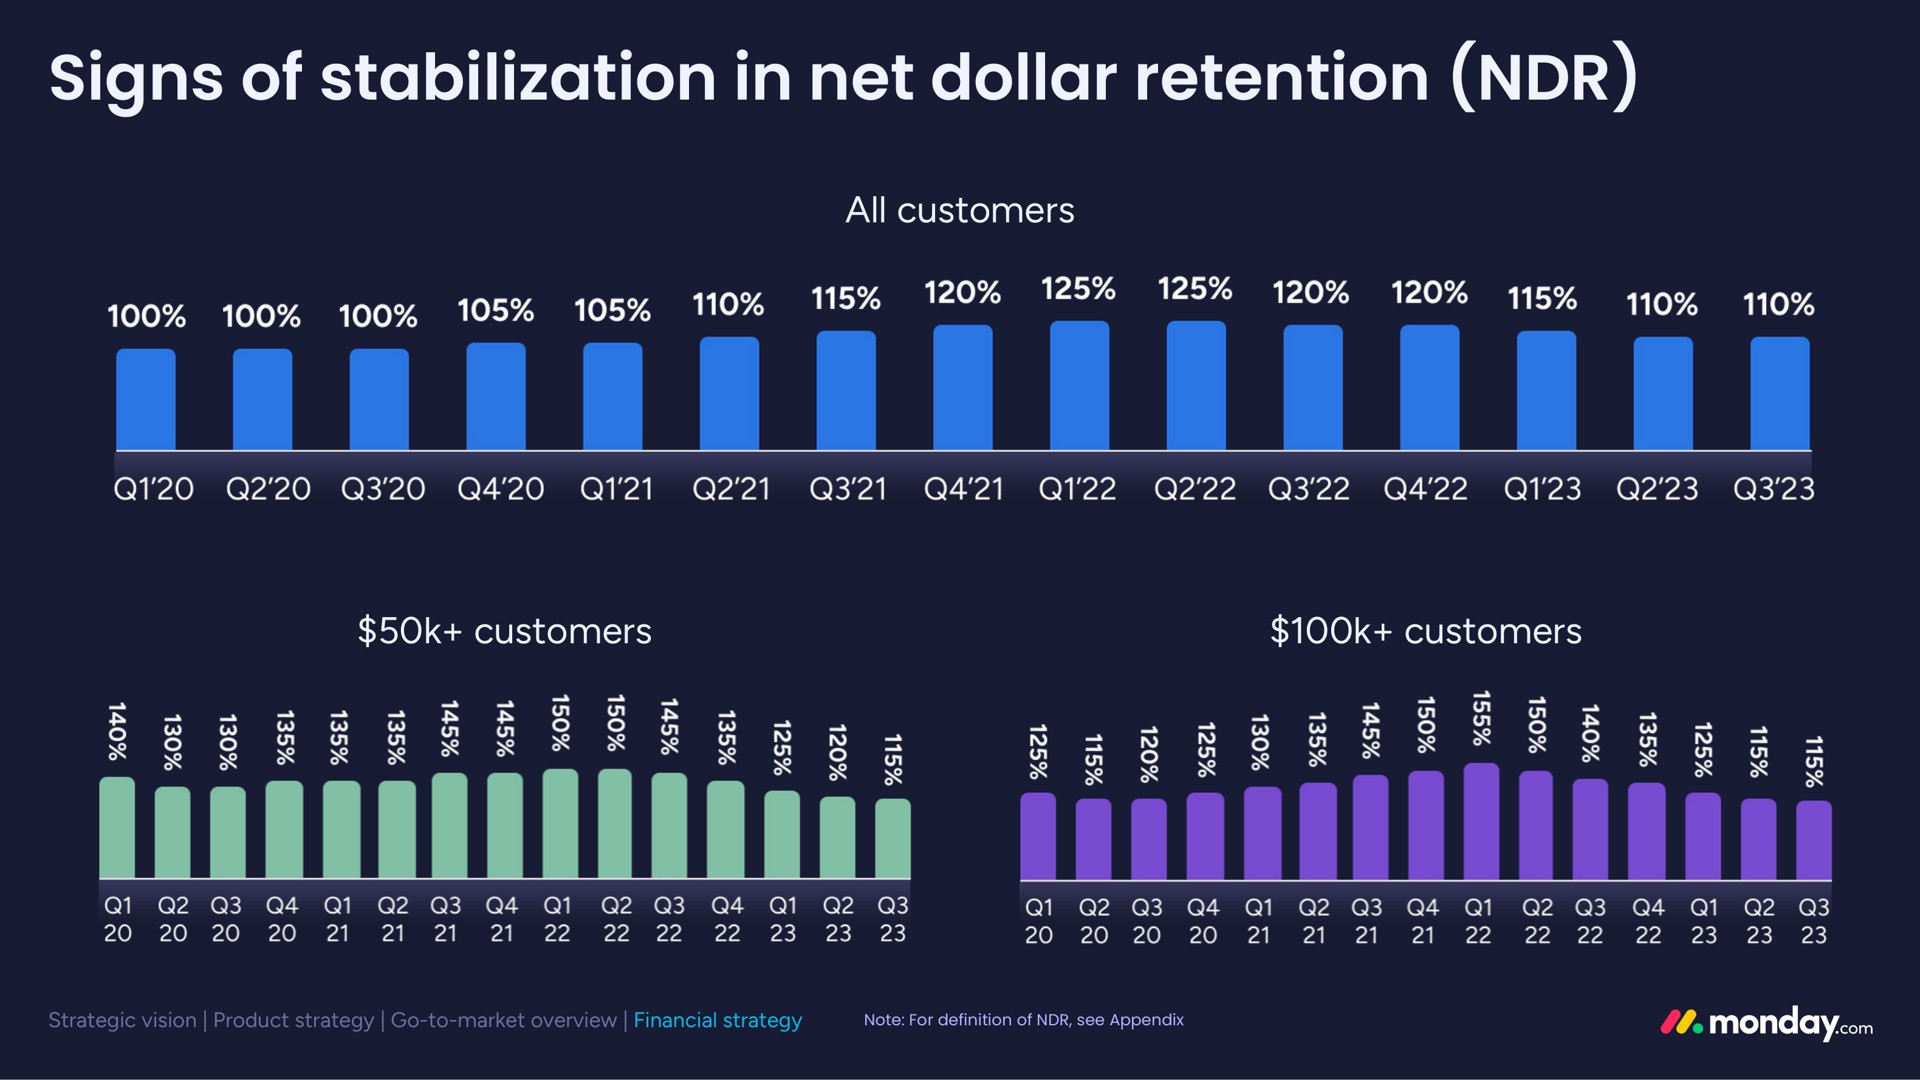 signs of stabilization in net dollar retention | monday.com